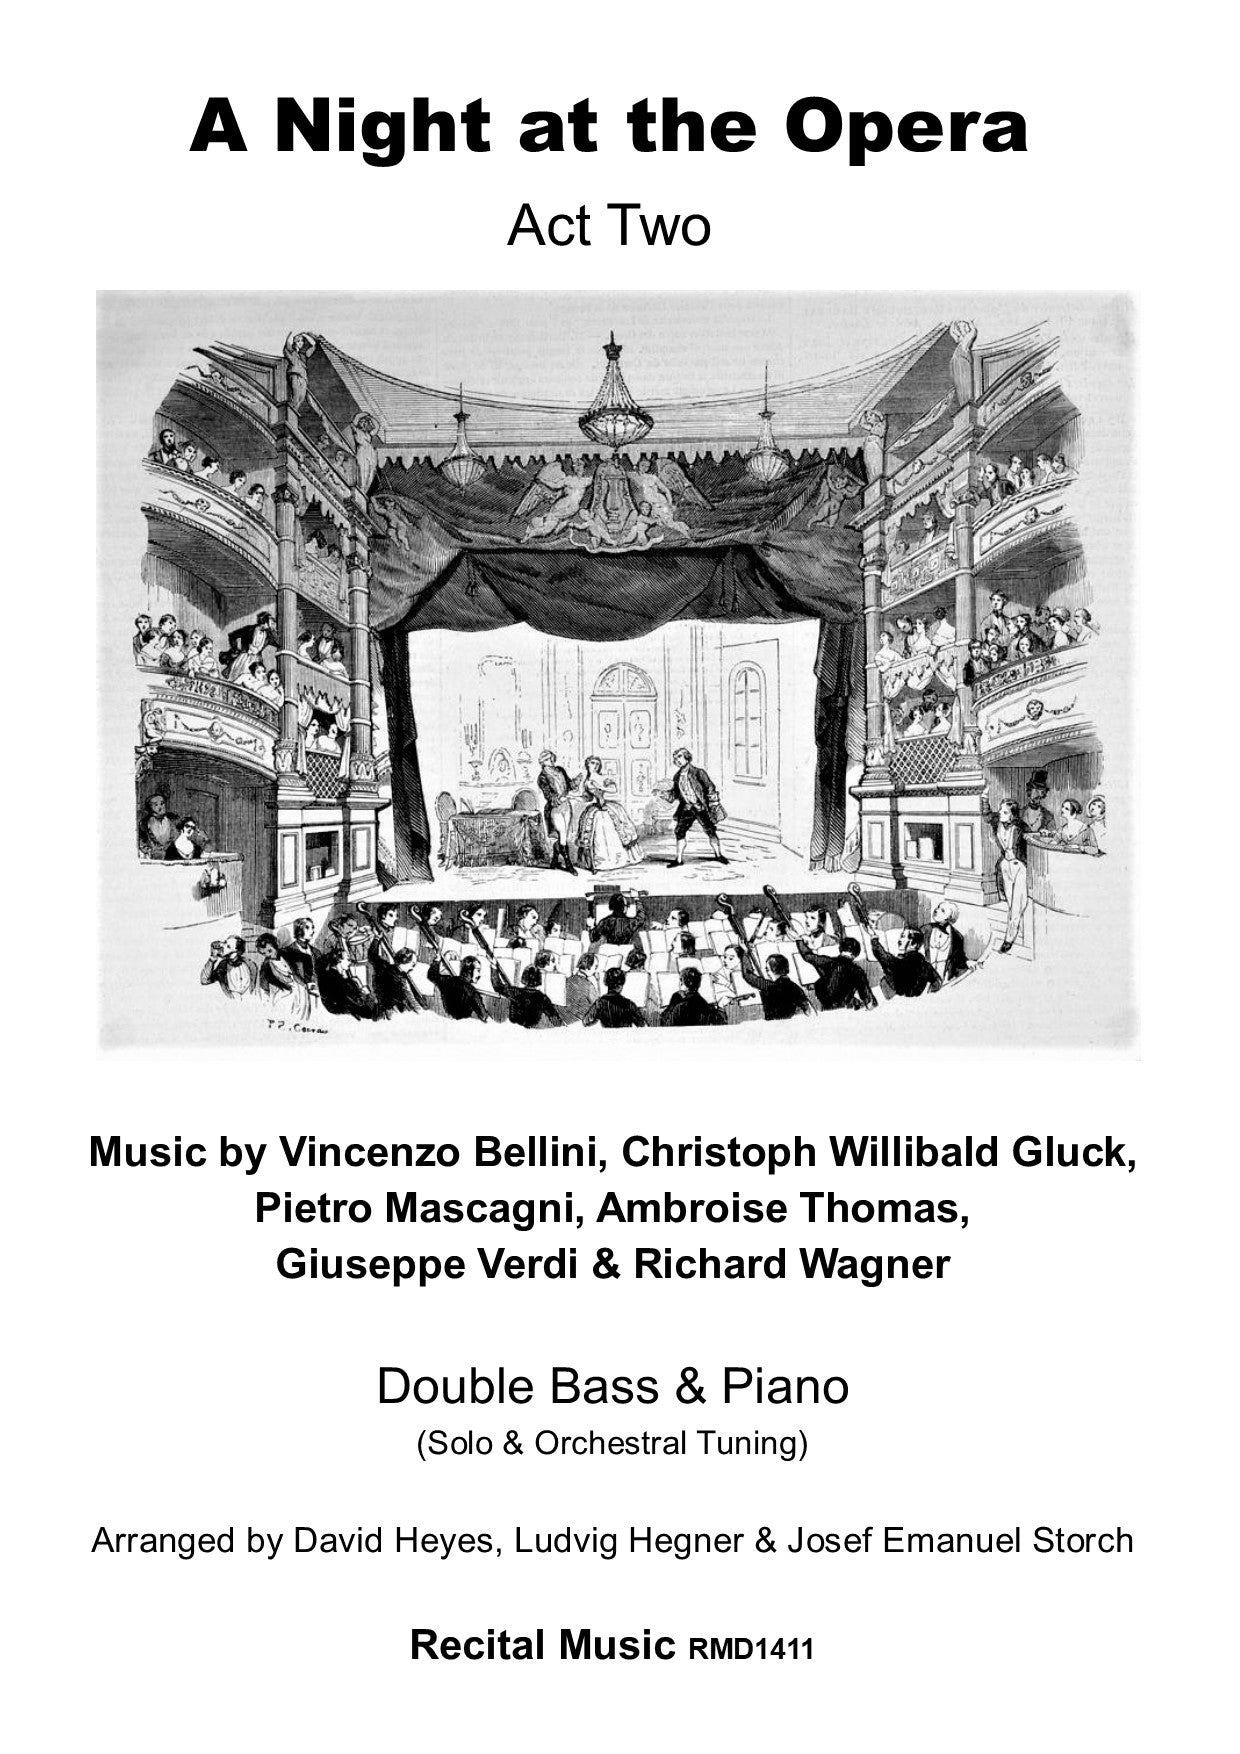 A Night at the Opera: Act Two for double bass & piano (arr. David Heyes)